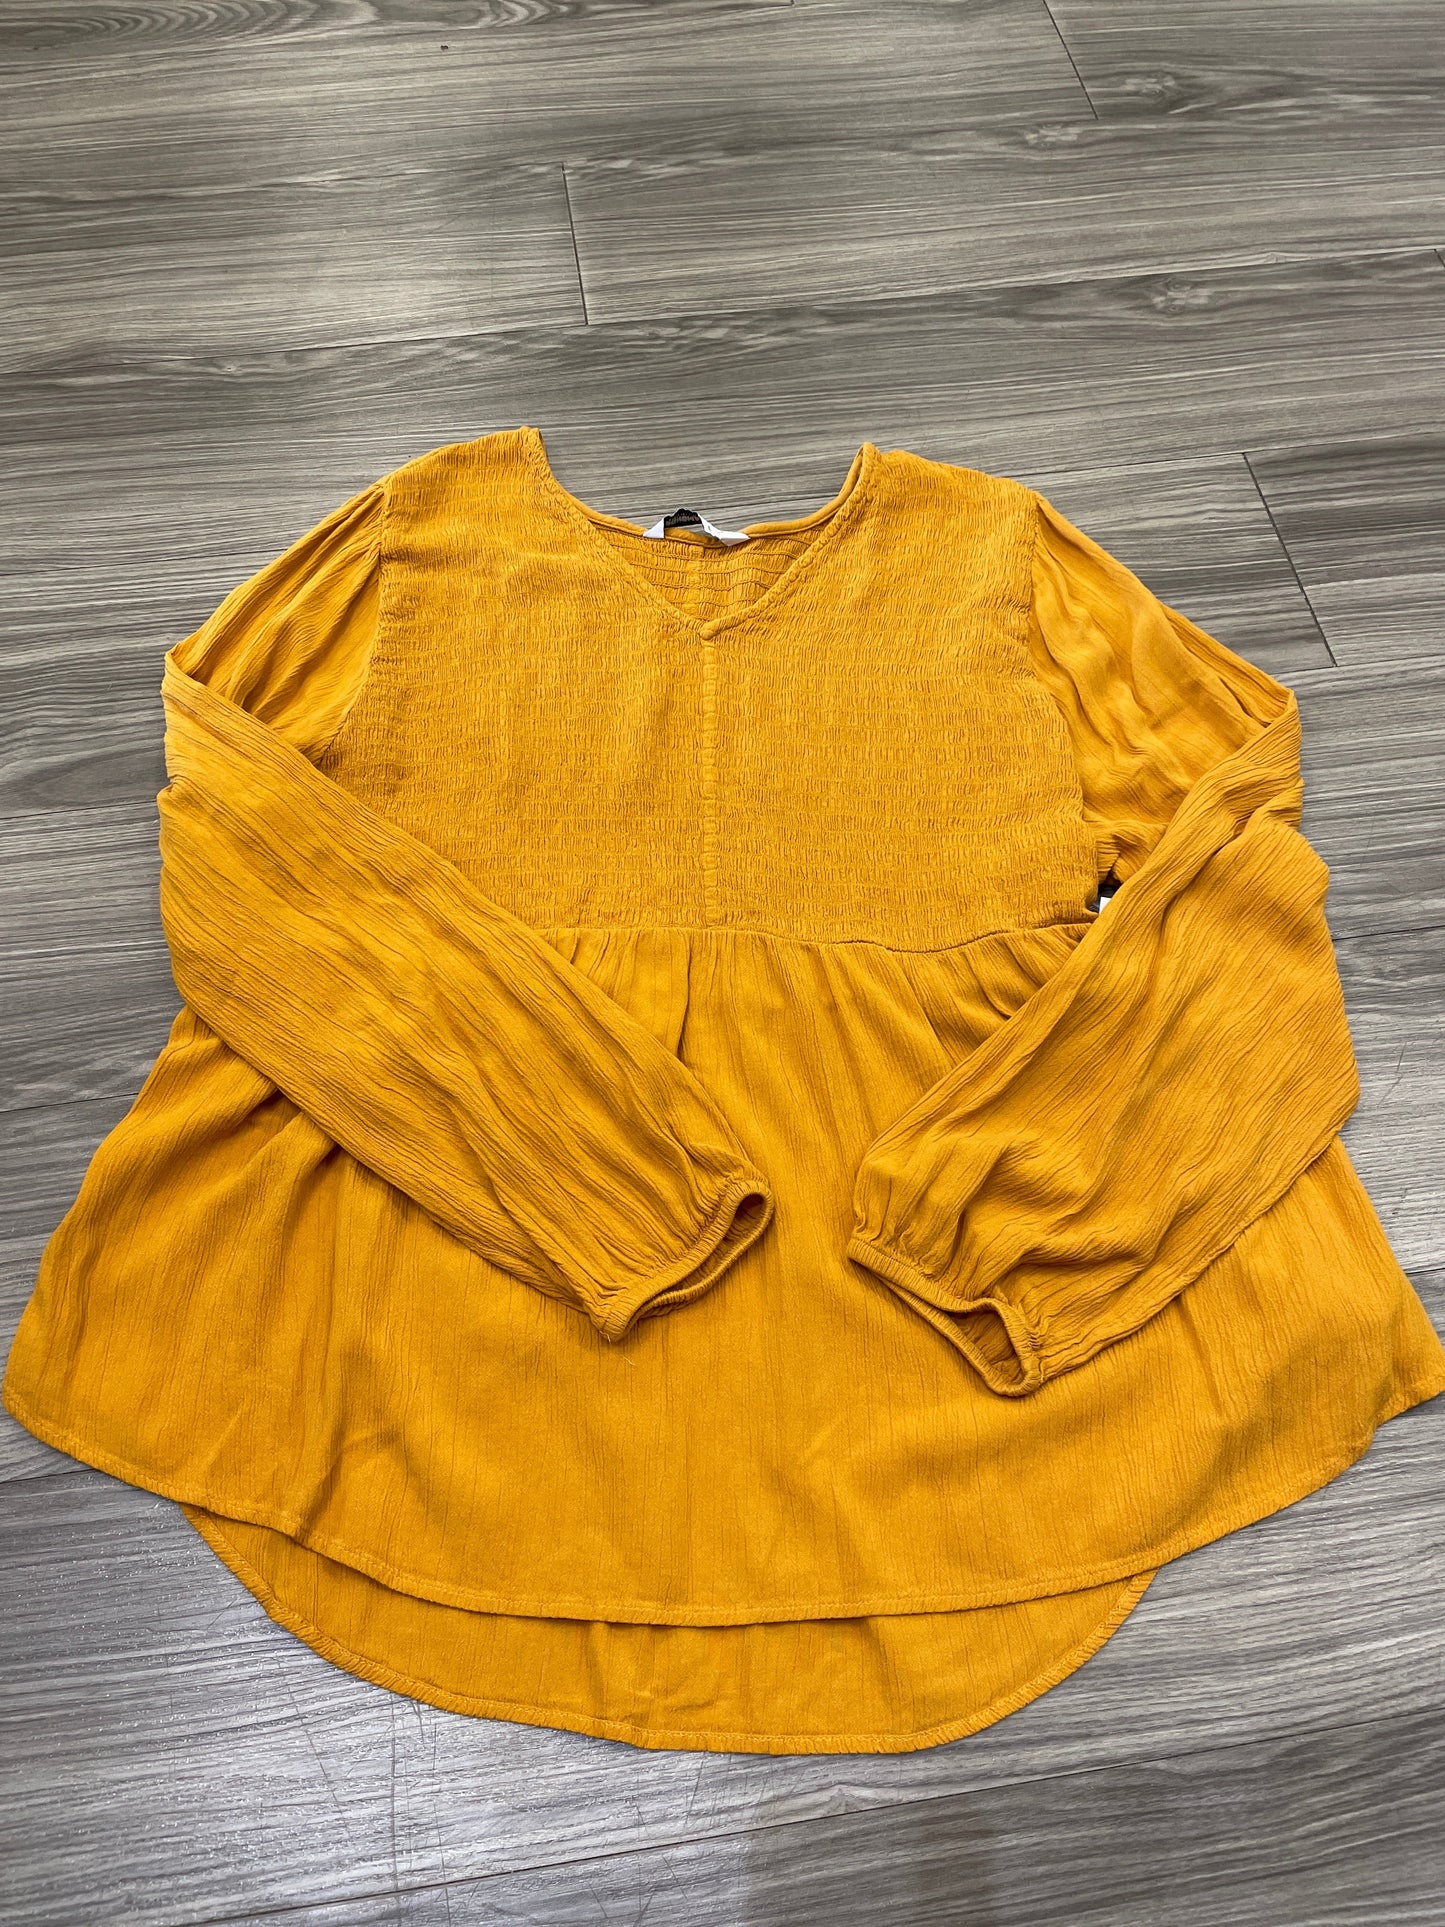 Yellow Top Long Sleeve Sonoma, Size 1x